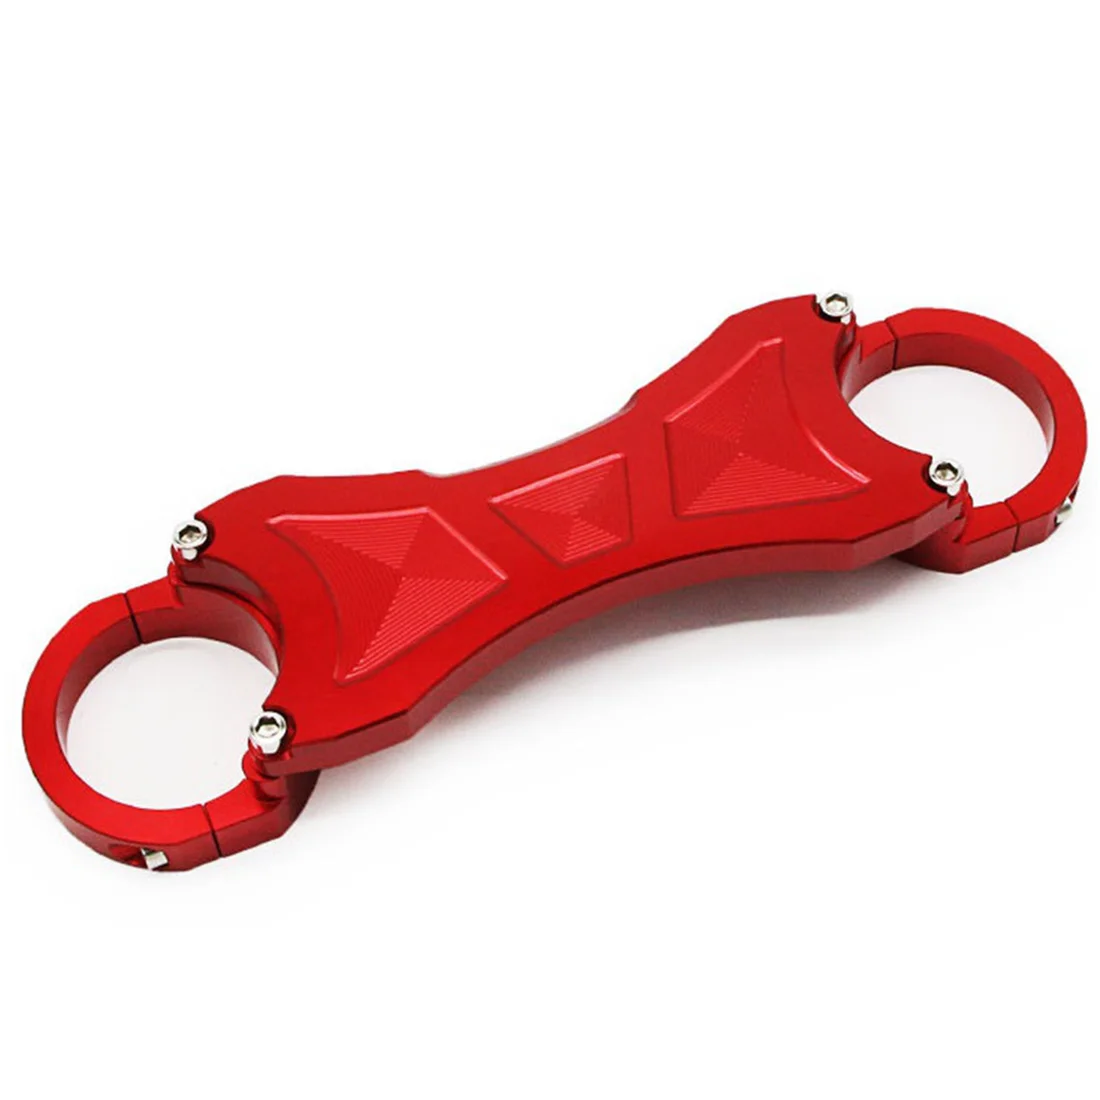 

Motorcycle Front Fork Suspension Shock Absorber Balance Bracket for Yamaha XMAX300 XMAX 300 X-MAX 250 125 400(Red)